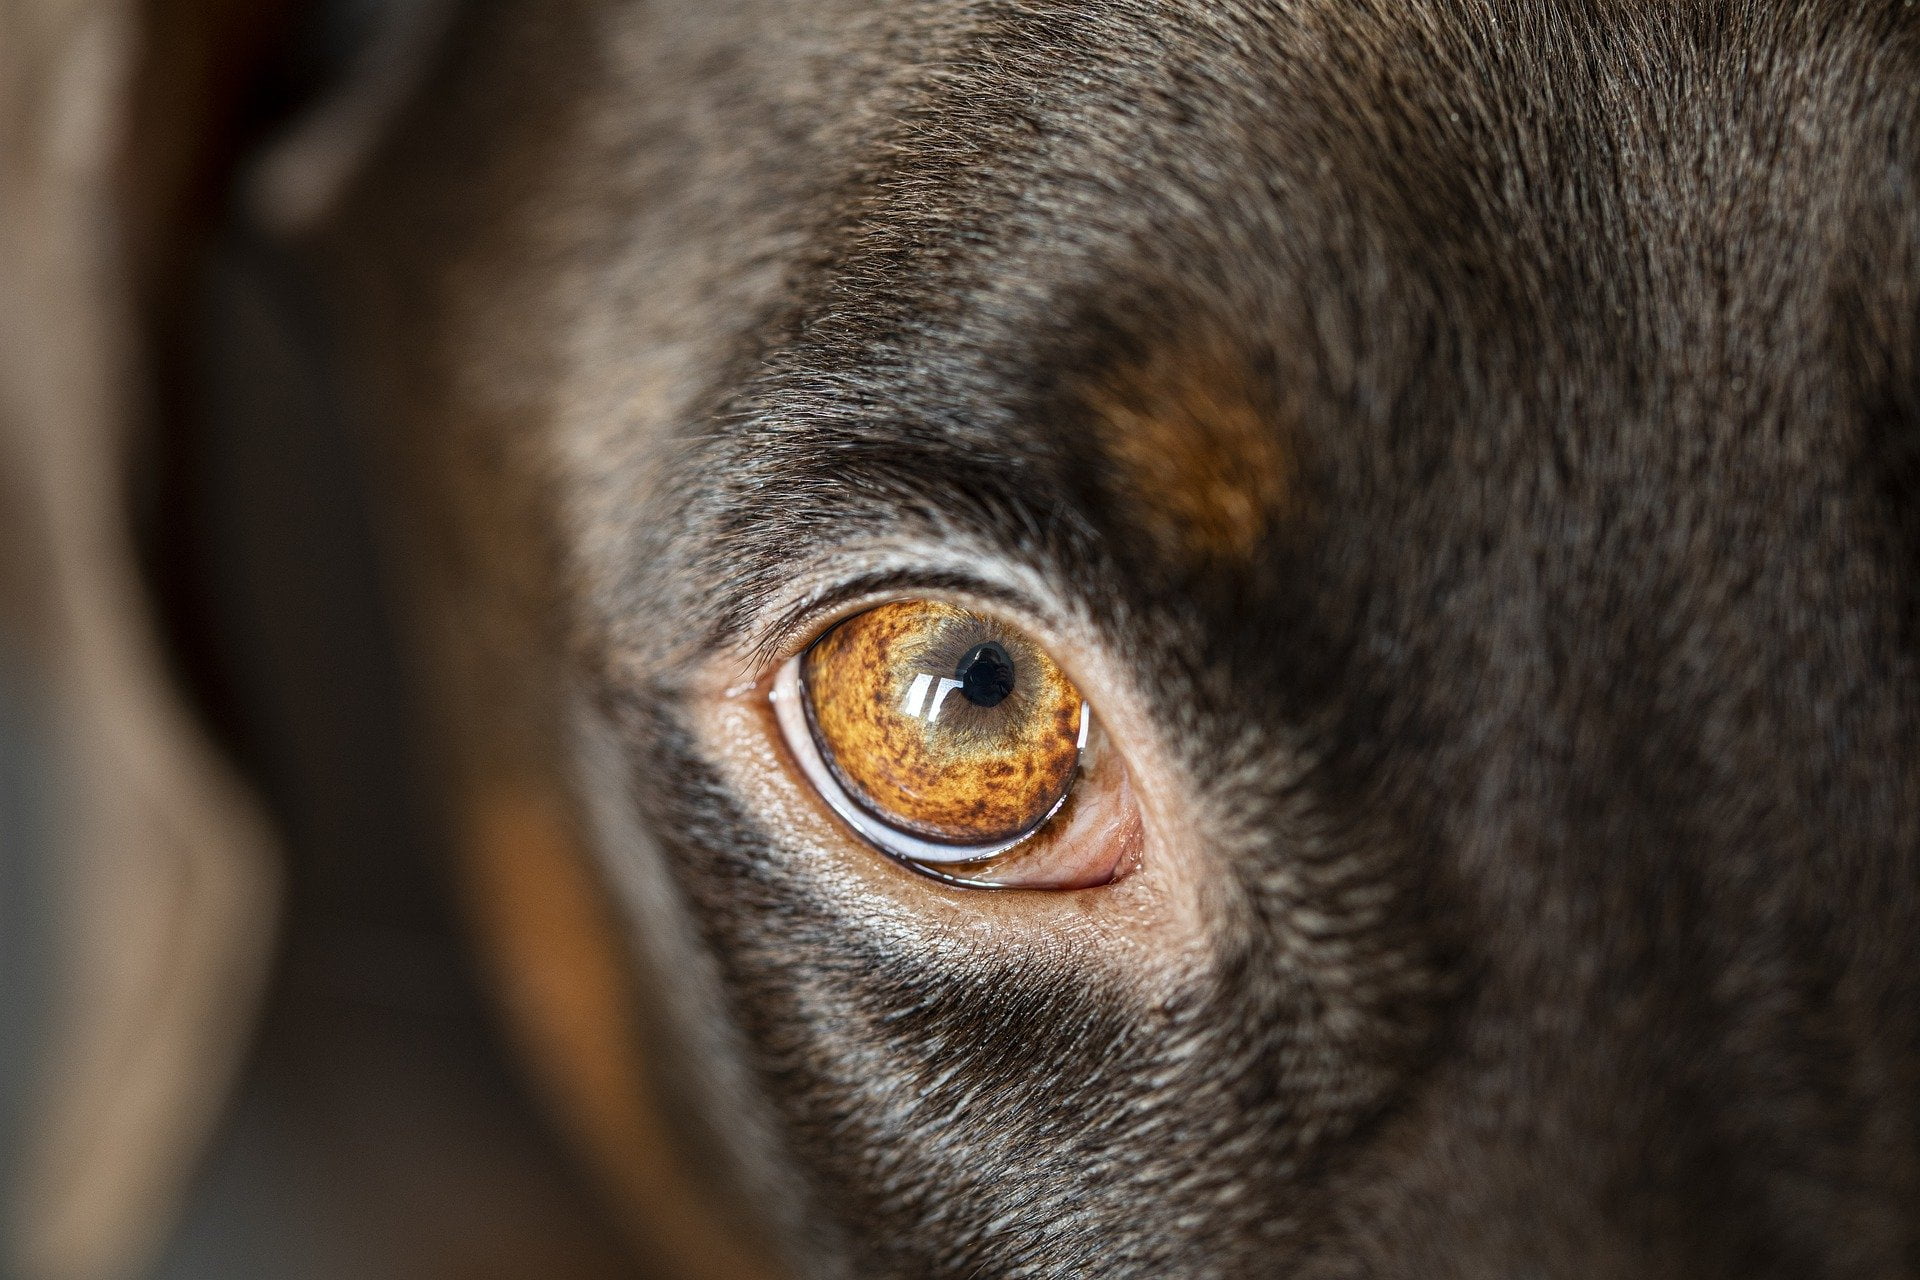 A close-up picture of a dog's eye